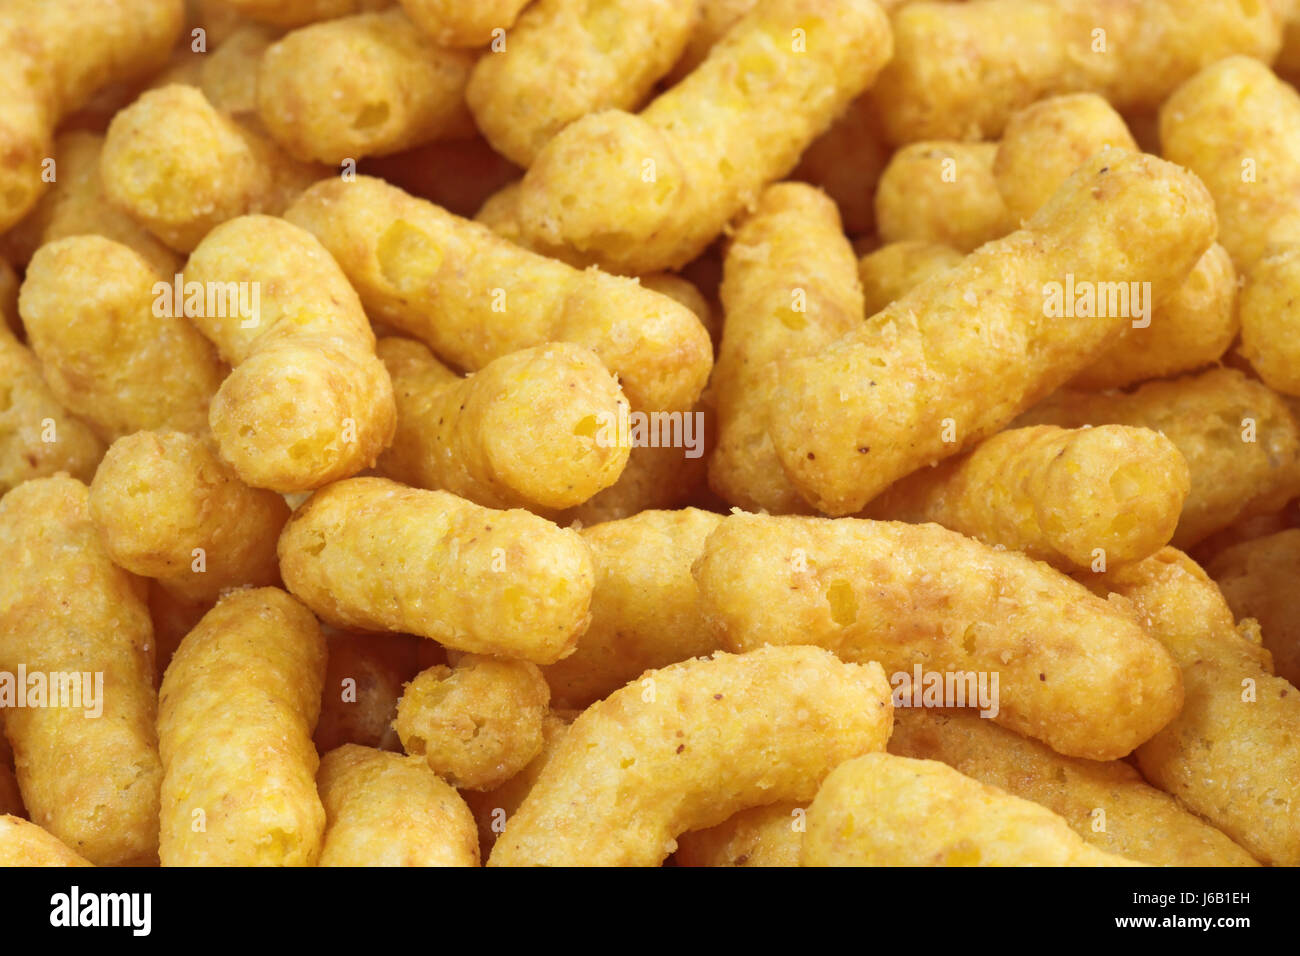 oxidized roasted parched food aliment spicy oxidized between meal rich in Stock Photo